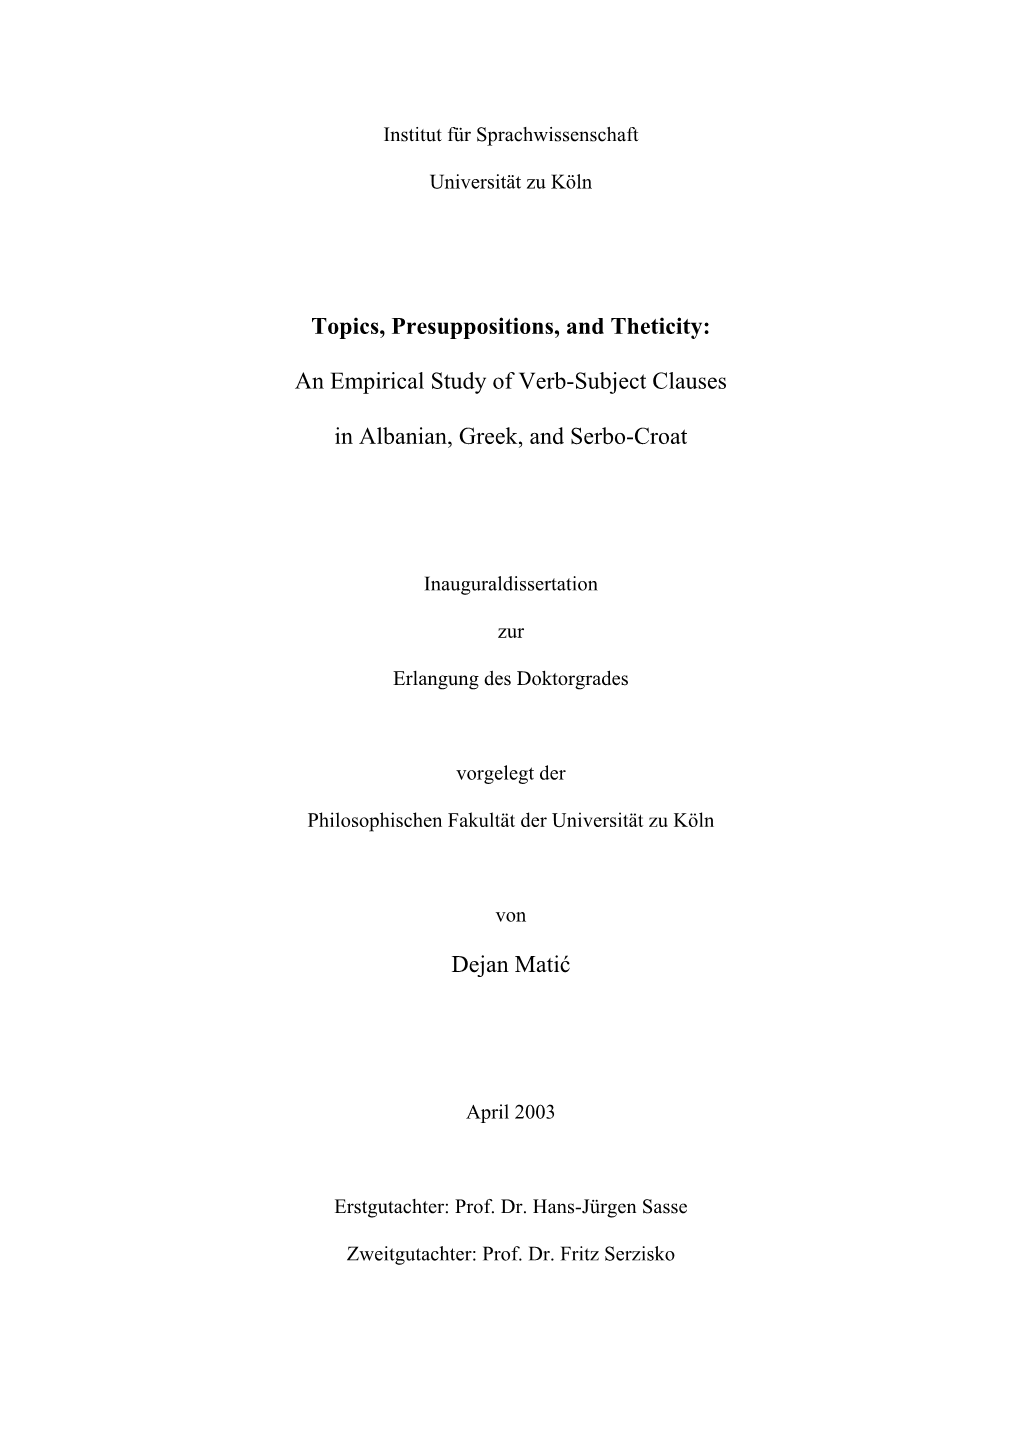 Topics, Presuppositions, and Theticity: an Empirical Study Of